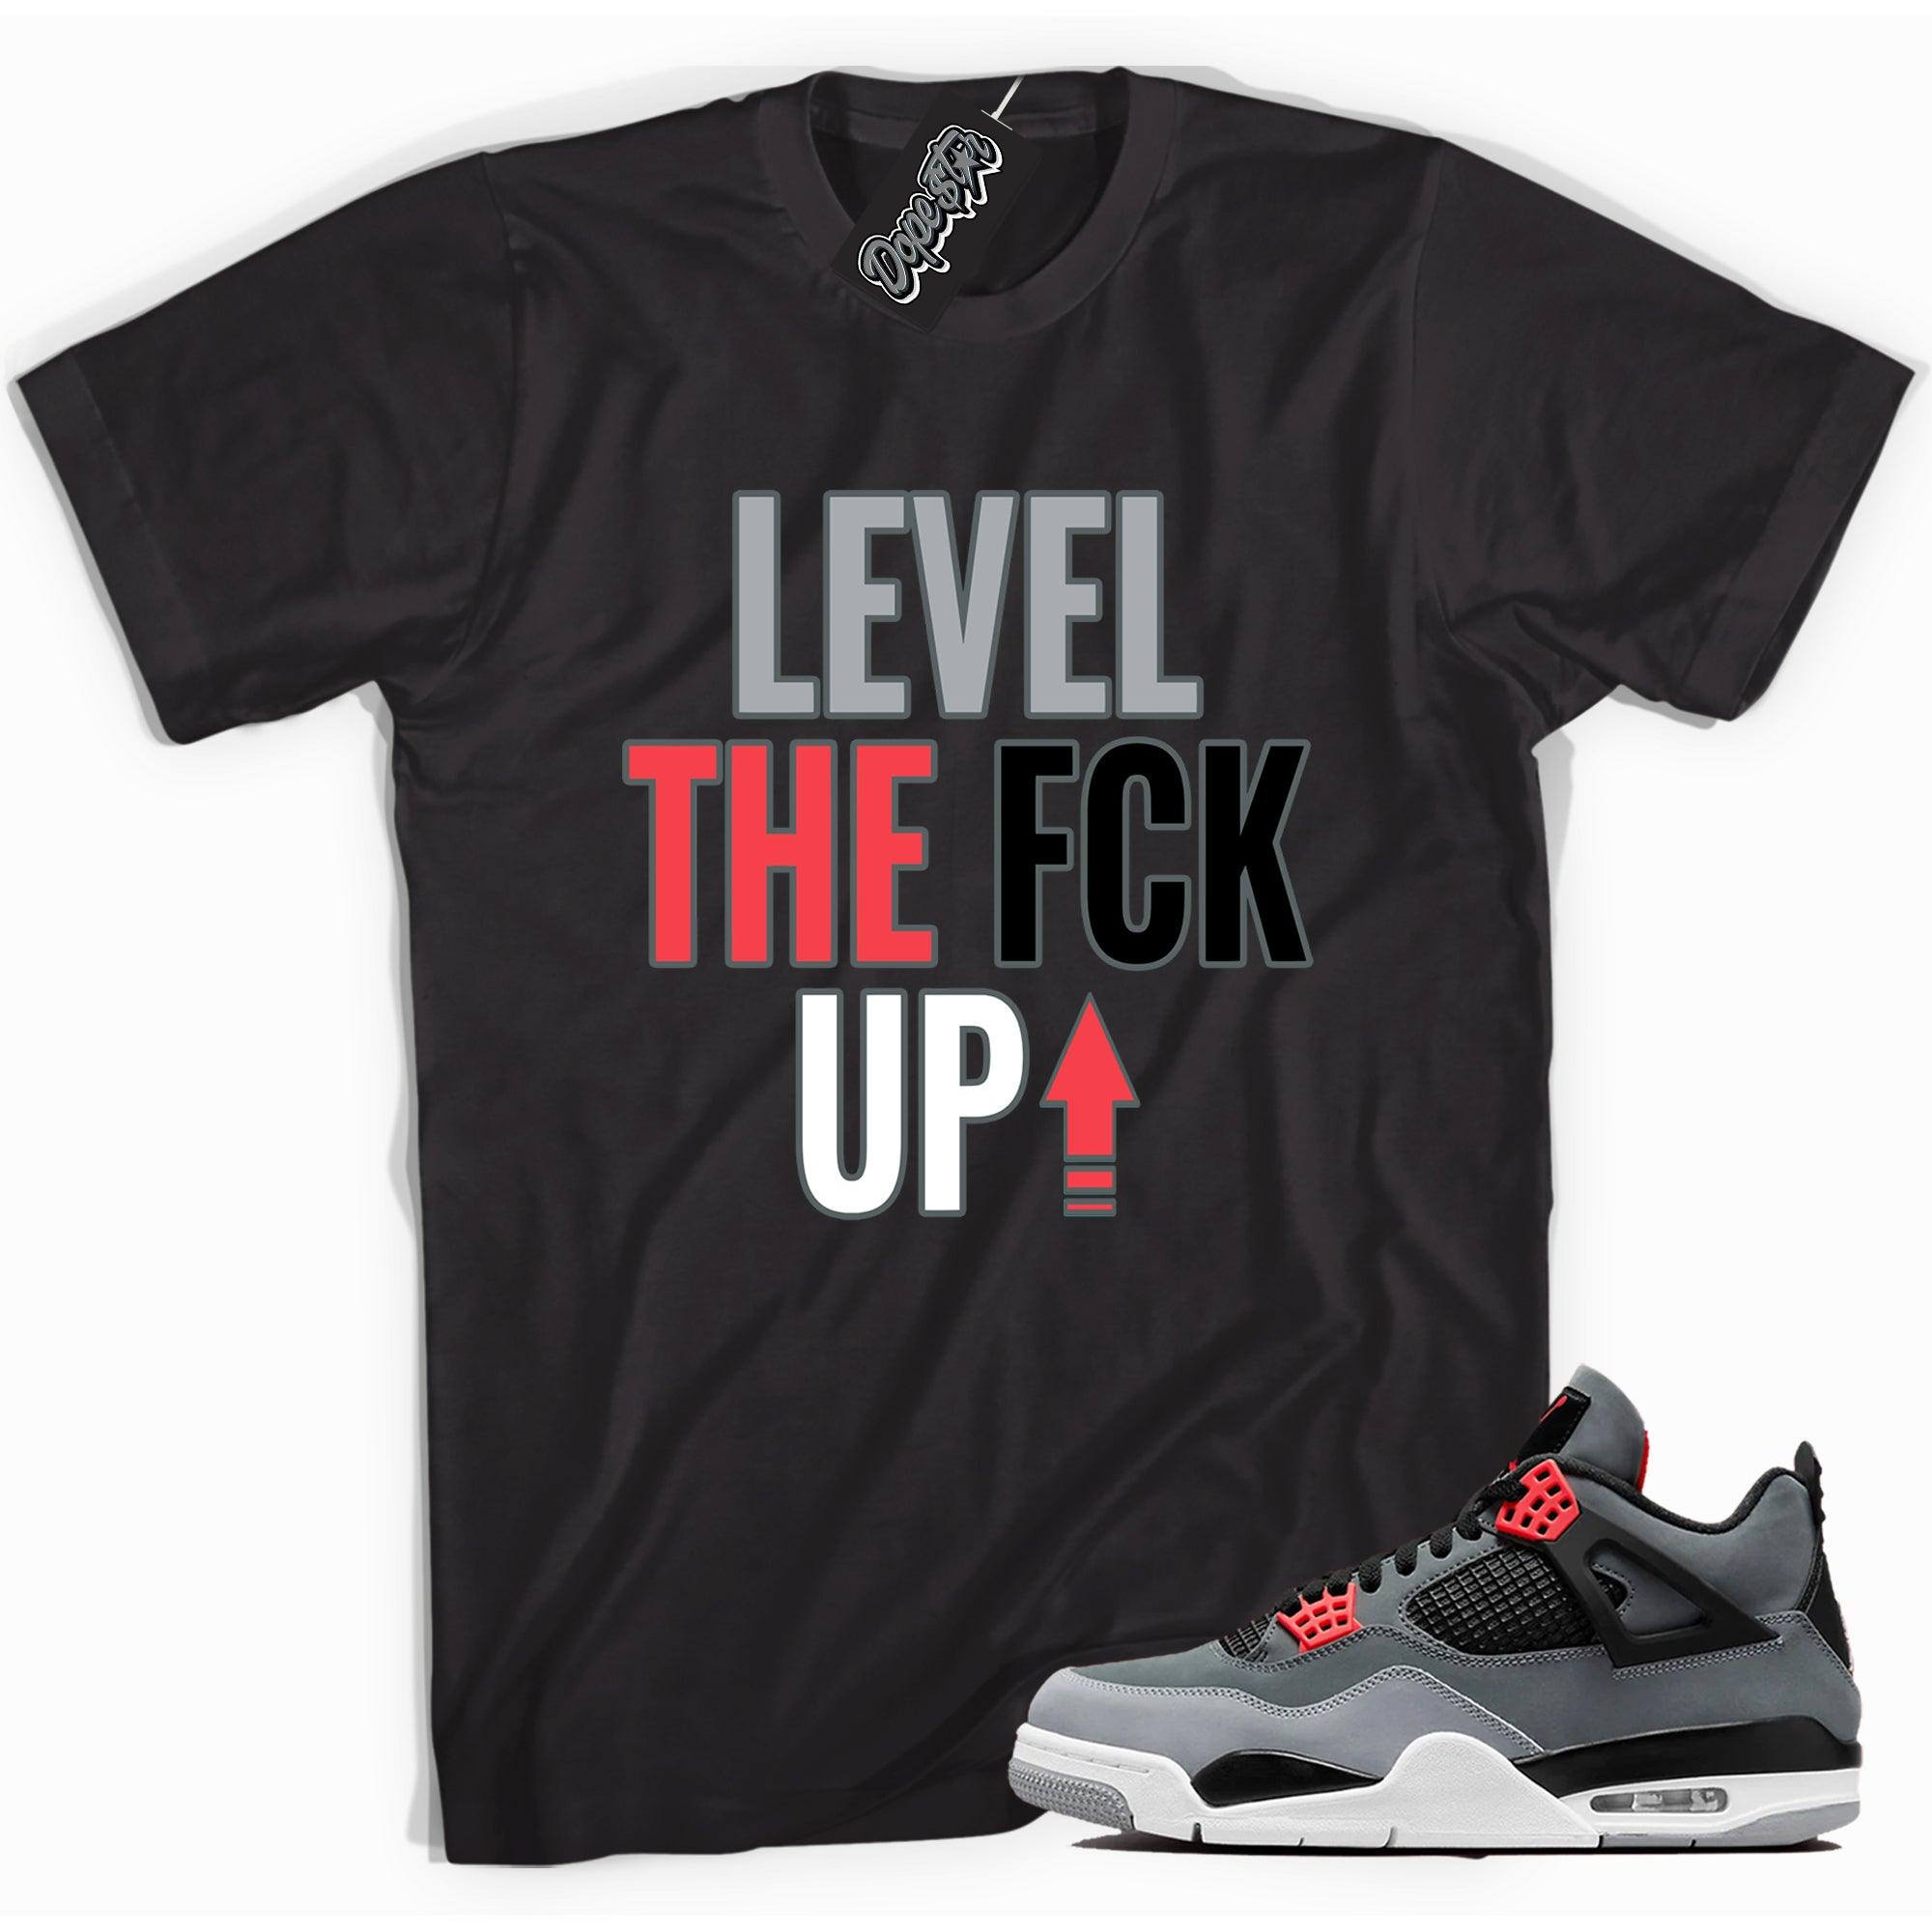 Cool black graphic tee with 'Level Up' print, that perfectly matches Air Jordan 4 Infrared Toe sneakers.